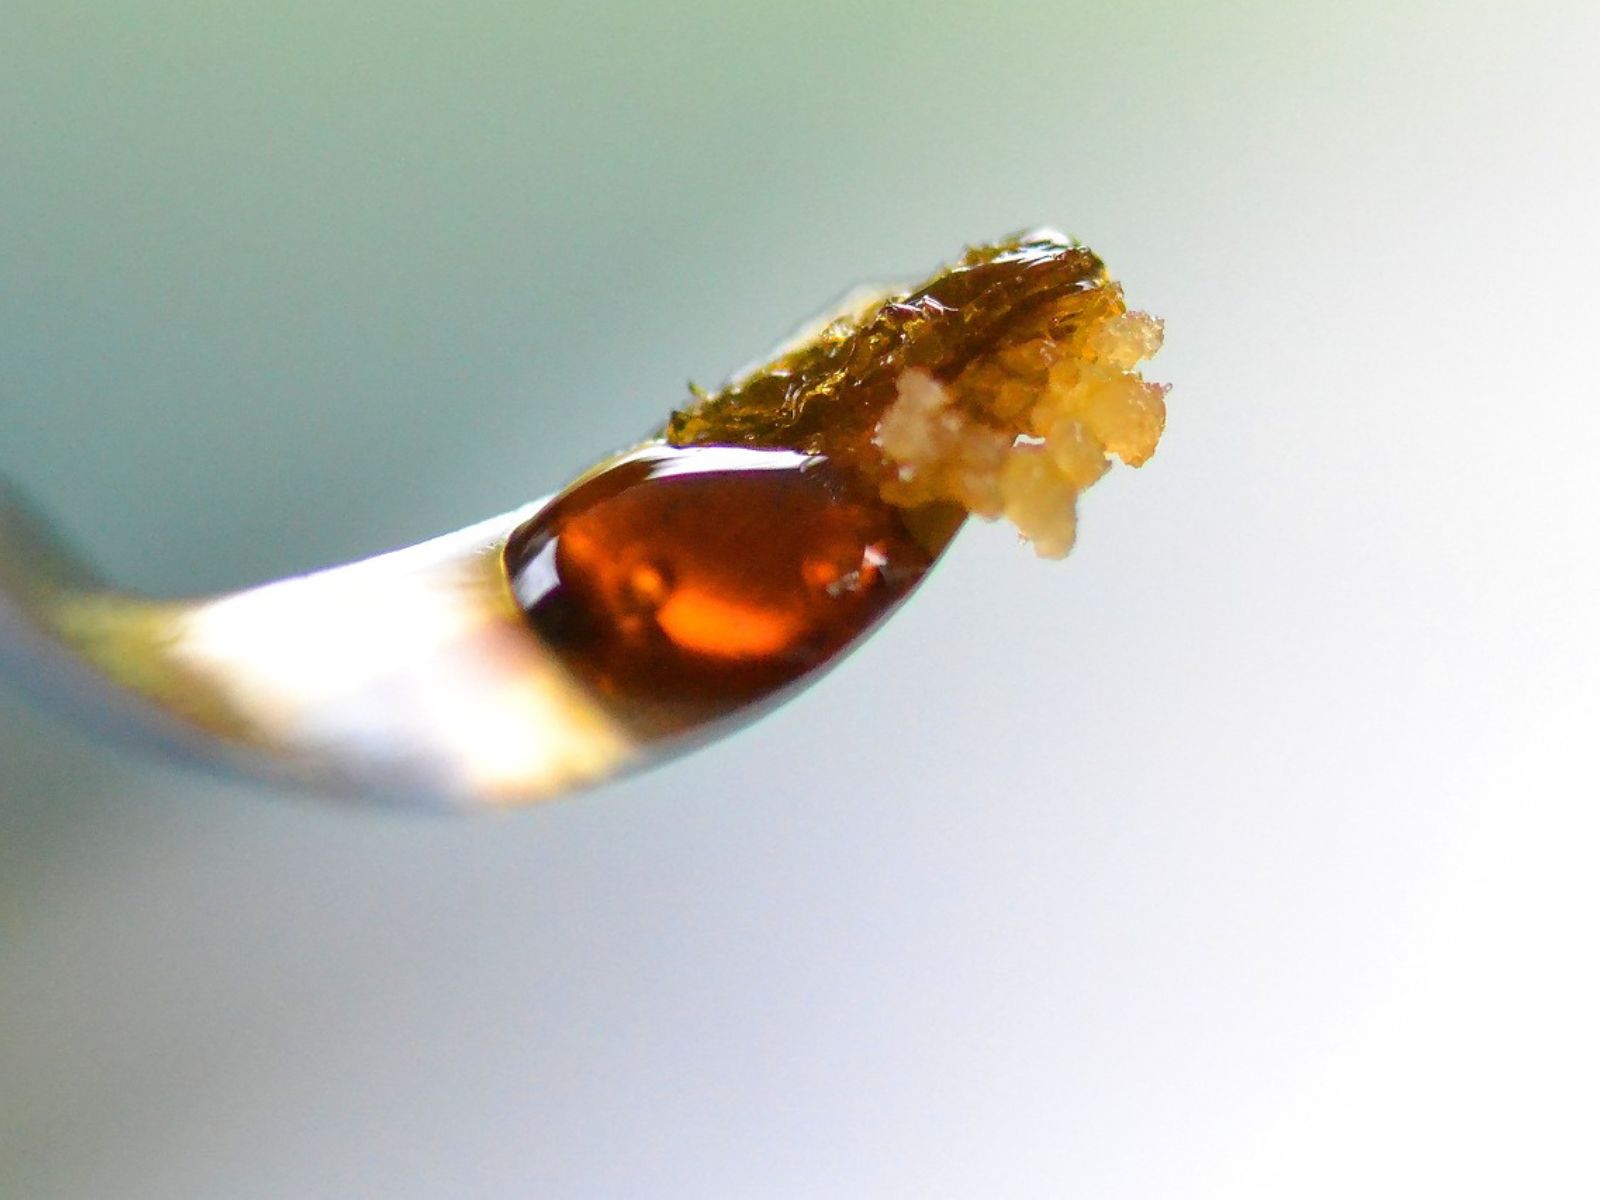 Global Cannabis Concentrate Market Projected To Cross $2.4 Billion By 2030